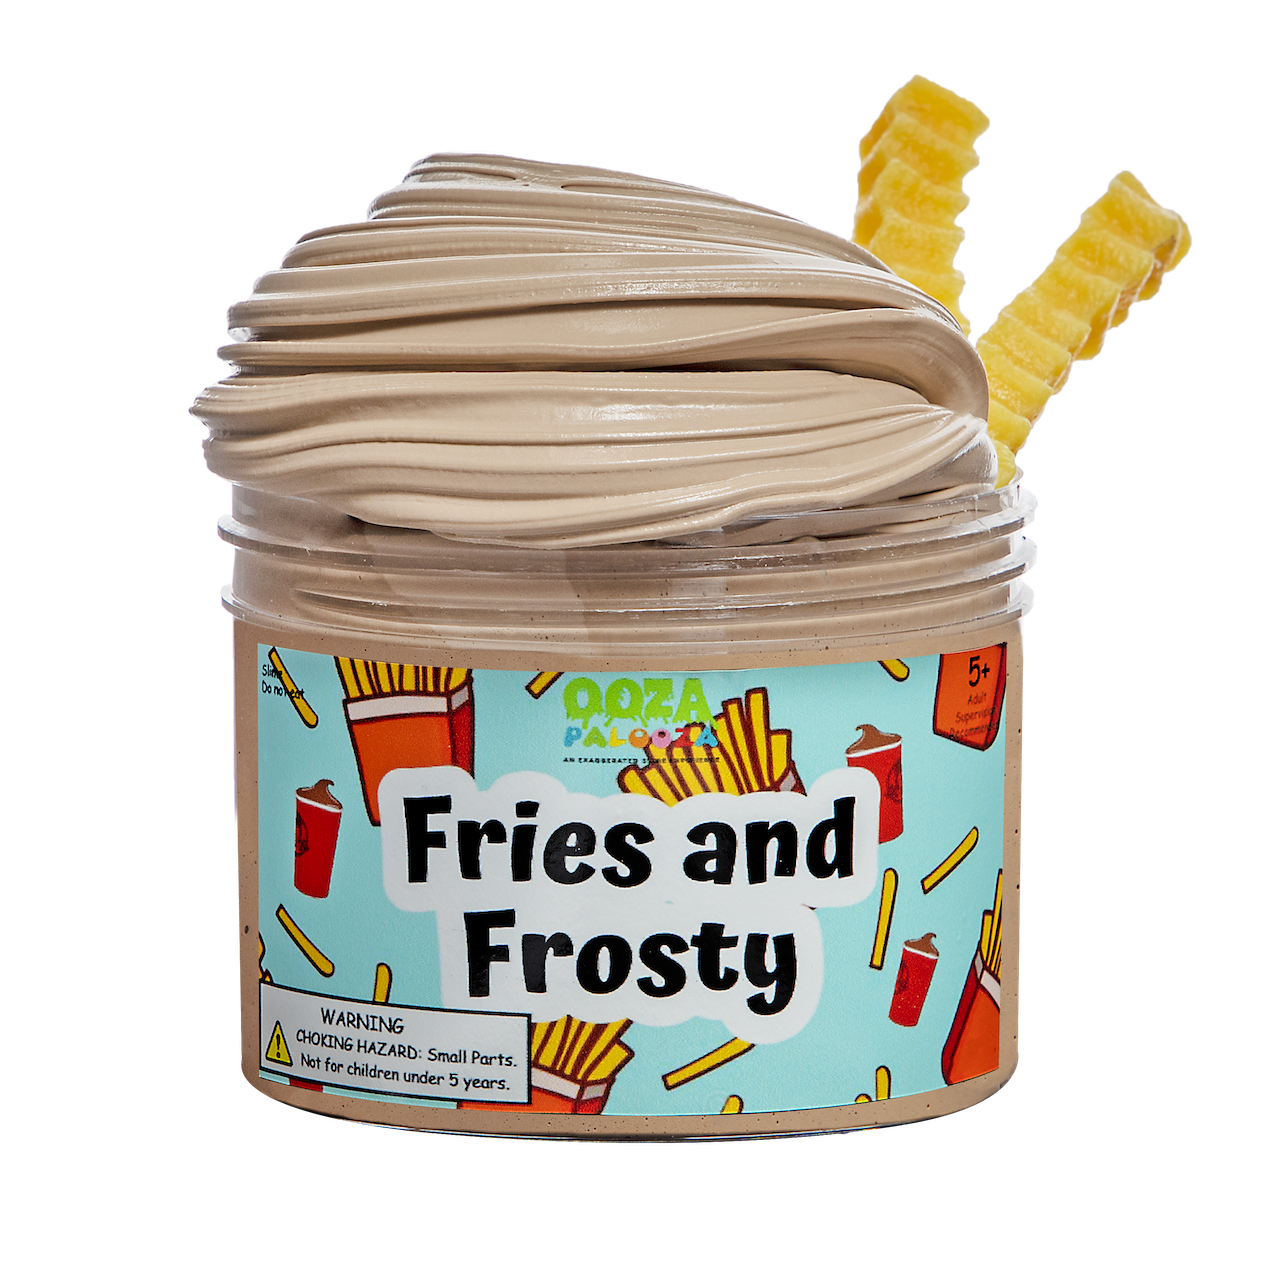 Fries and Frosty Slime